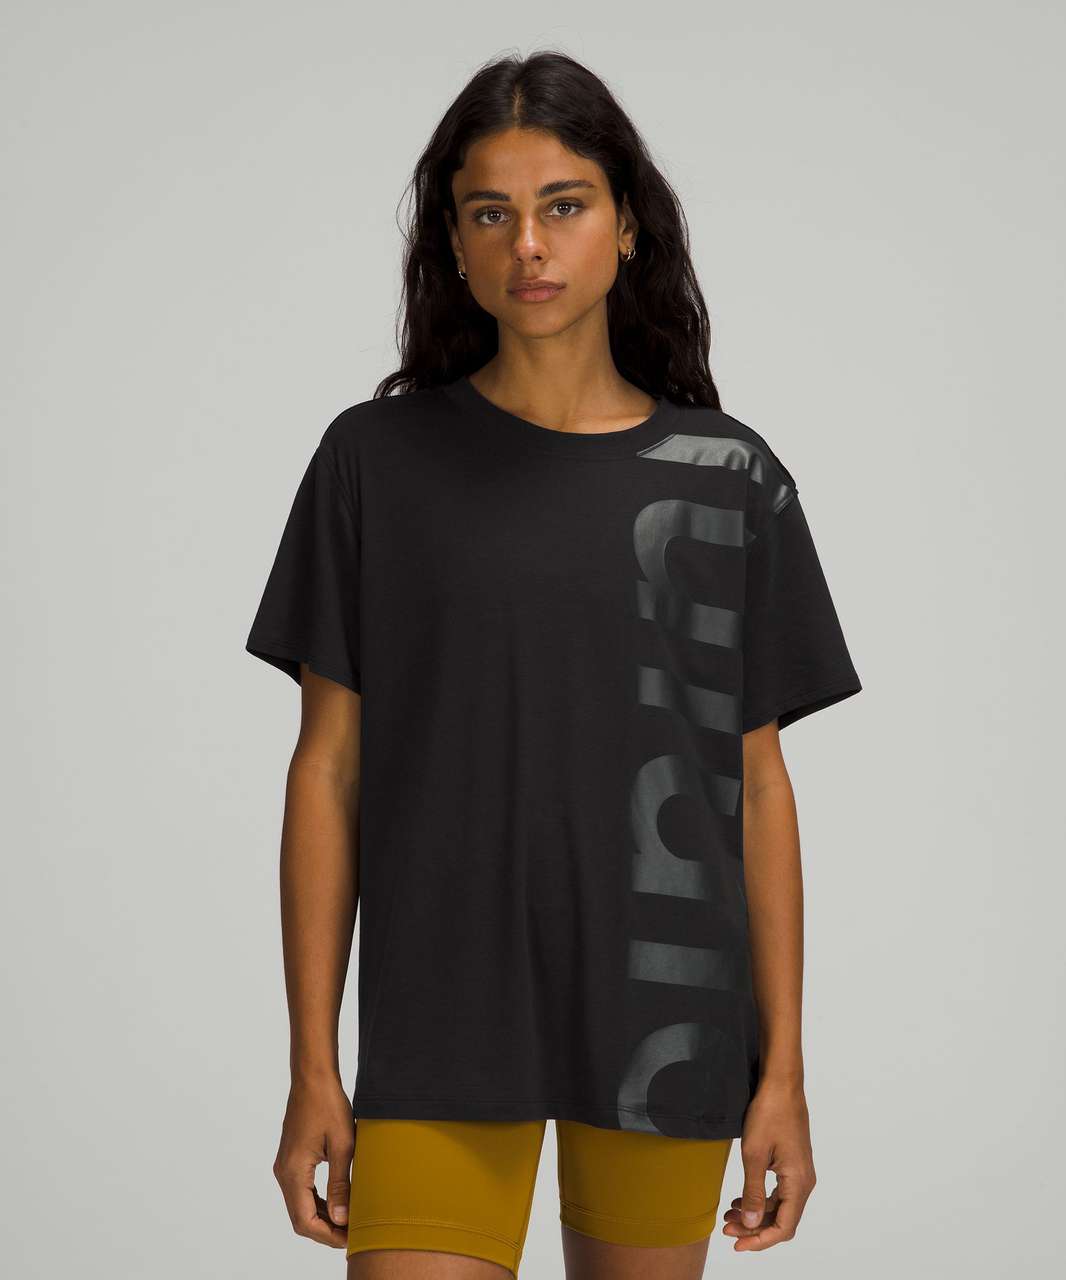 Lululemon All Yours Graphic Short Sleeve T-Shirt - Black (First Release)